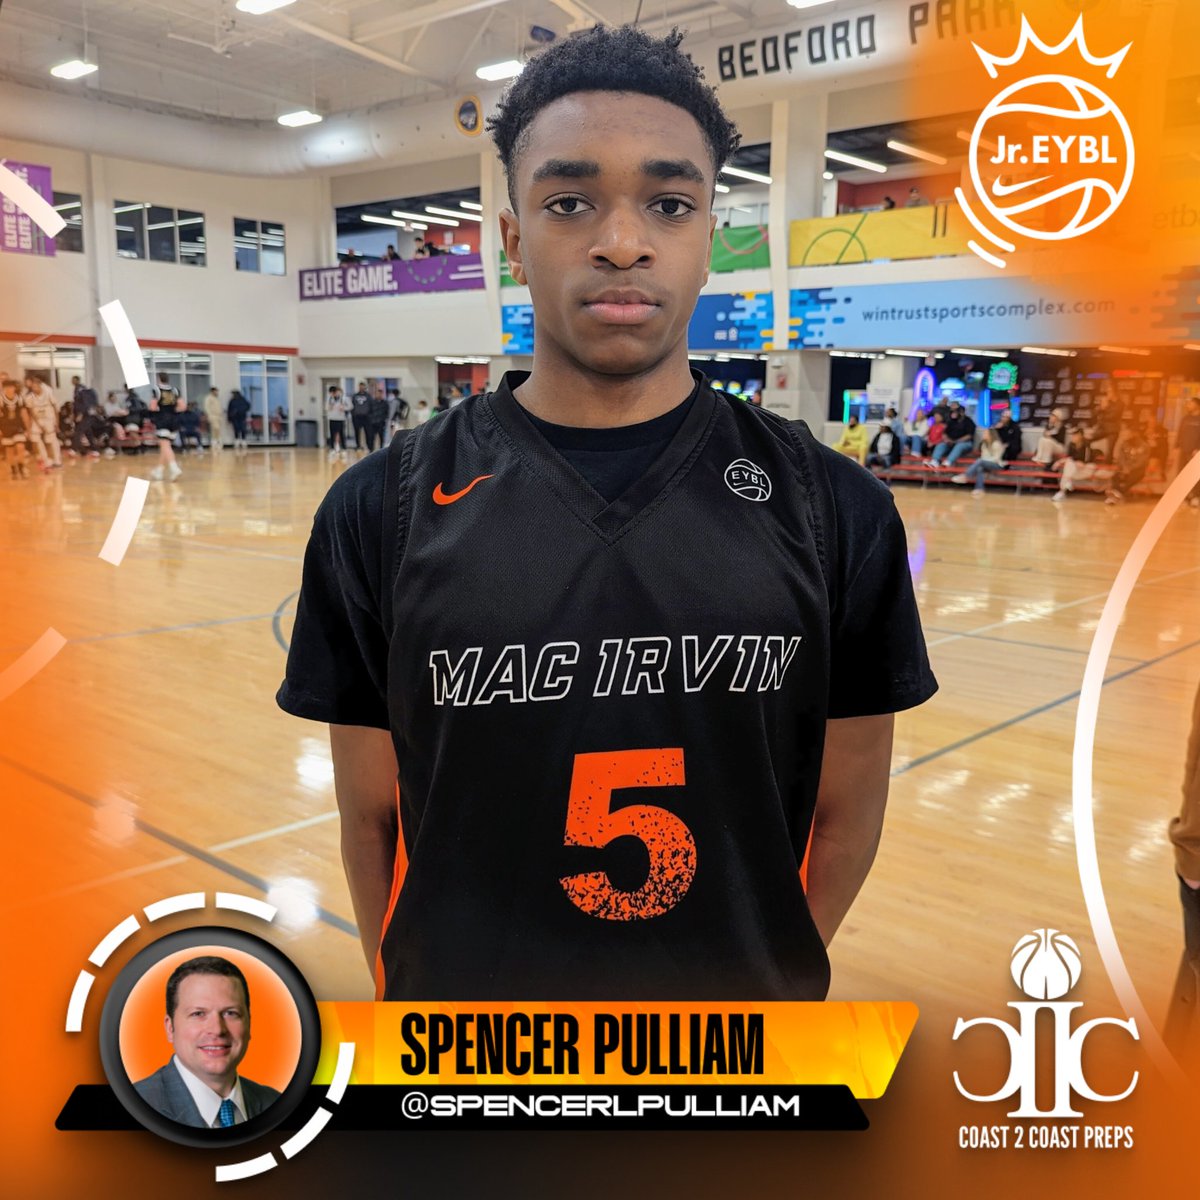 📍#NikeJrEYBL 🏀 📂 Mac Irvin Fire - Orange (IL) 👤 Blake Williams 📝 2028 6'3' F/G Blake Williams is having a nice showing for Mac Irvin Fire - Orange (IL) at the @NikeEYB Jr. EYBL Chicago Super Regional. The strong and athletic wing appears confident with the ball in his hands…